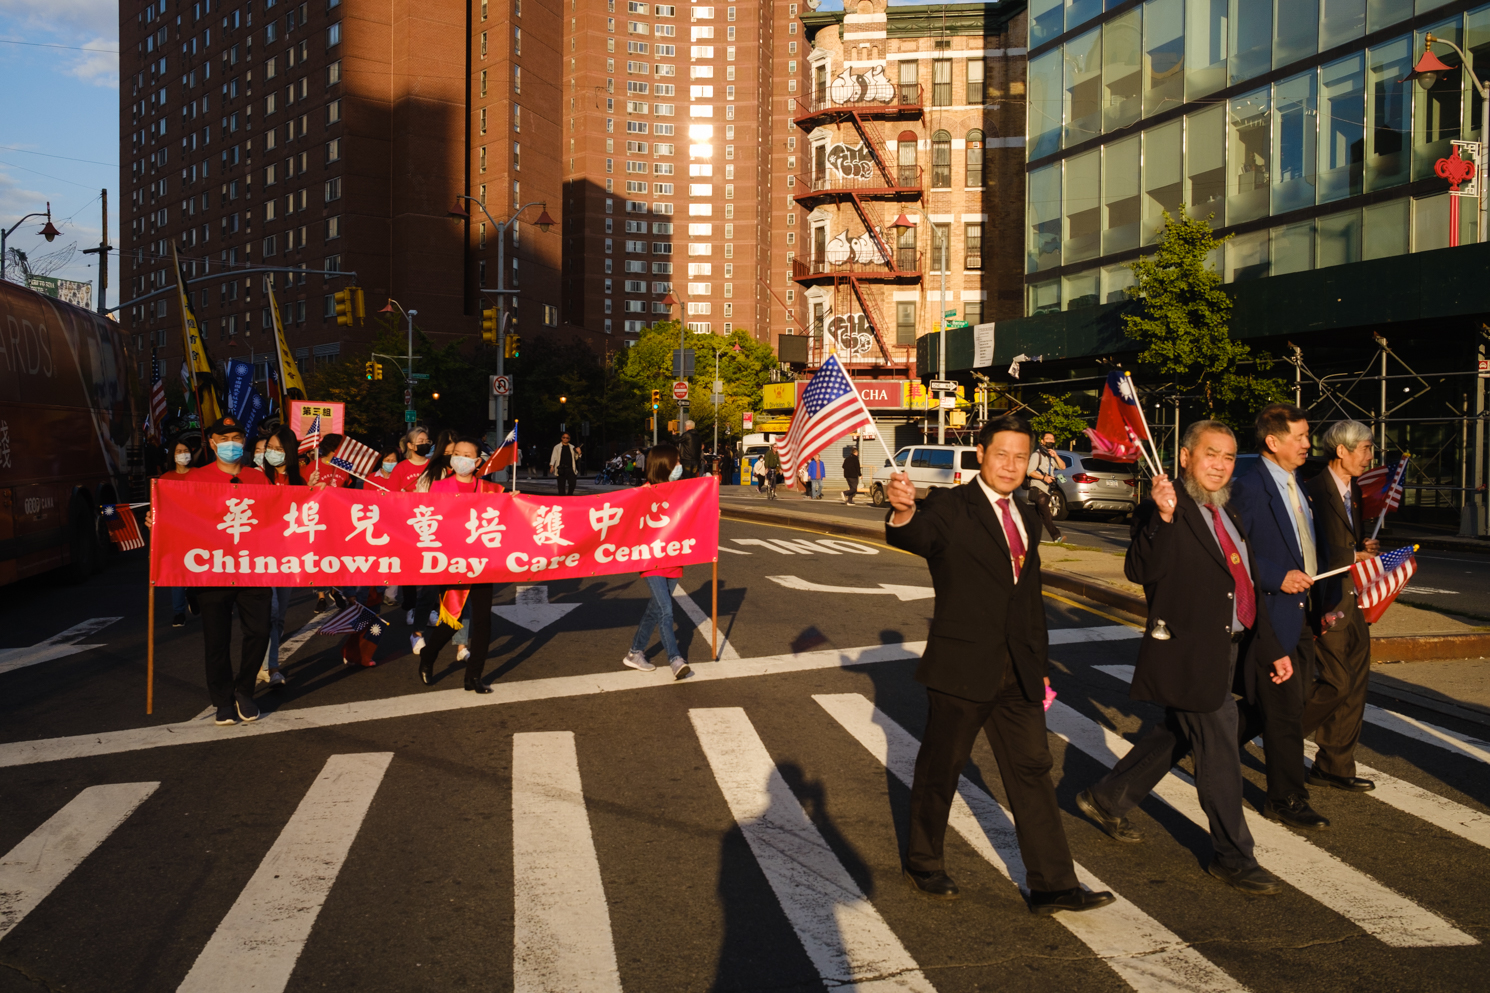 Attendees holding a red banner that reads “Chinatown Day Care Center” marches down Bowery. On the left are four men dressed in black suits holding the American and Taiwanese flags.